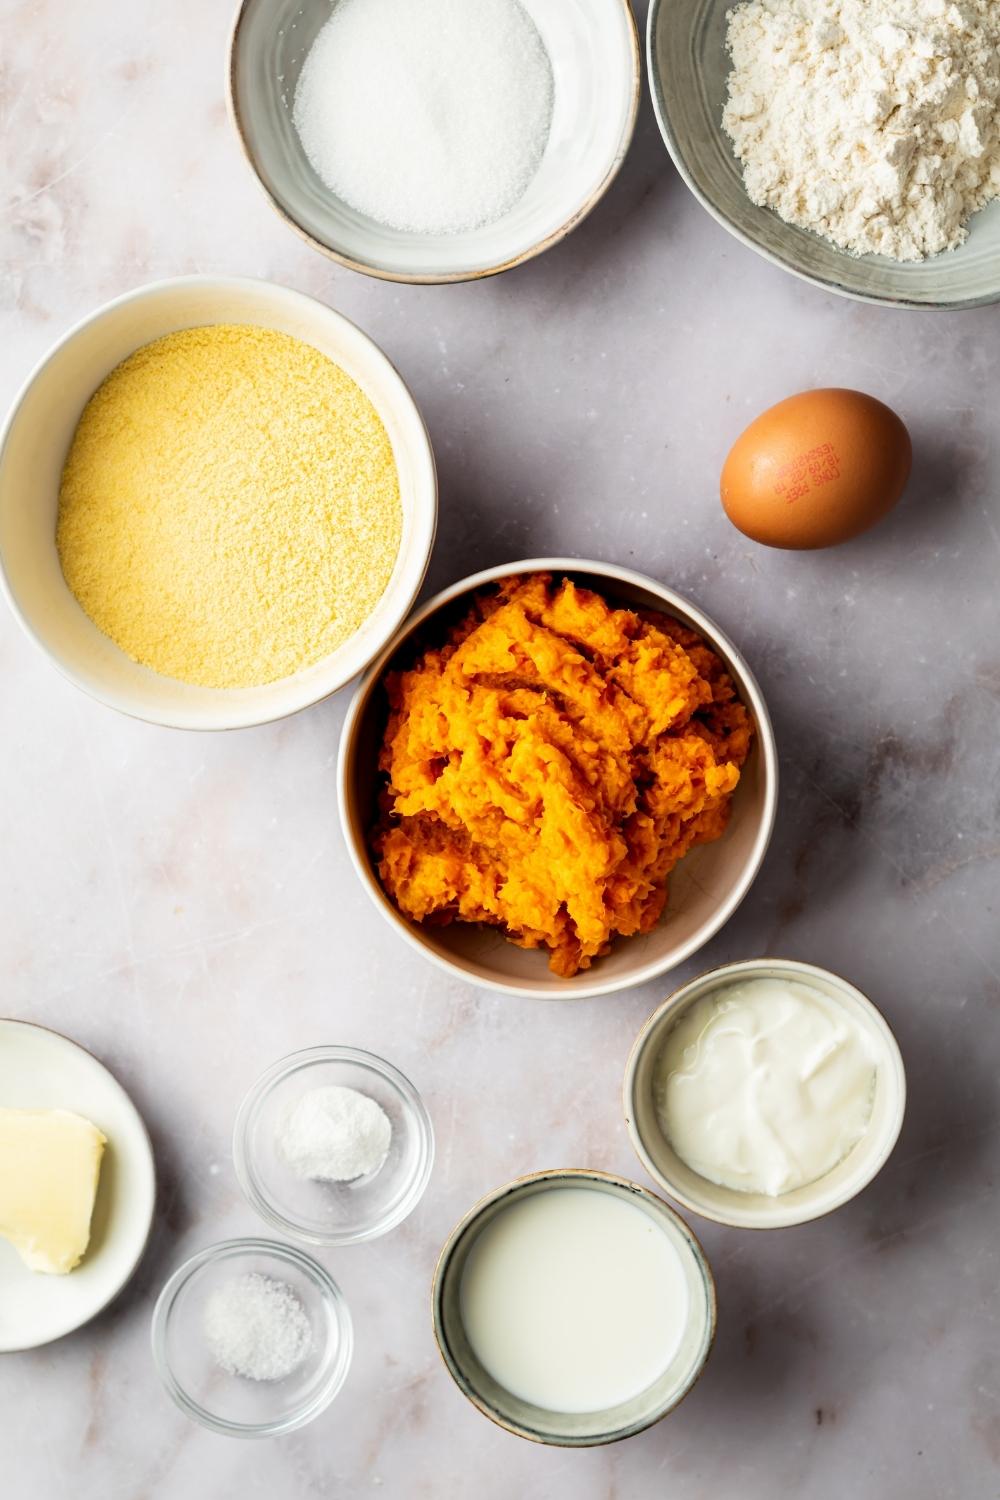 Mashed sweet potato in a bowl, egg, sour cream in a bowl, sugar in a bowl, cornmeal in a bowl, and part of a bowl of flour in it all on a gray counter.